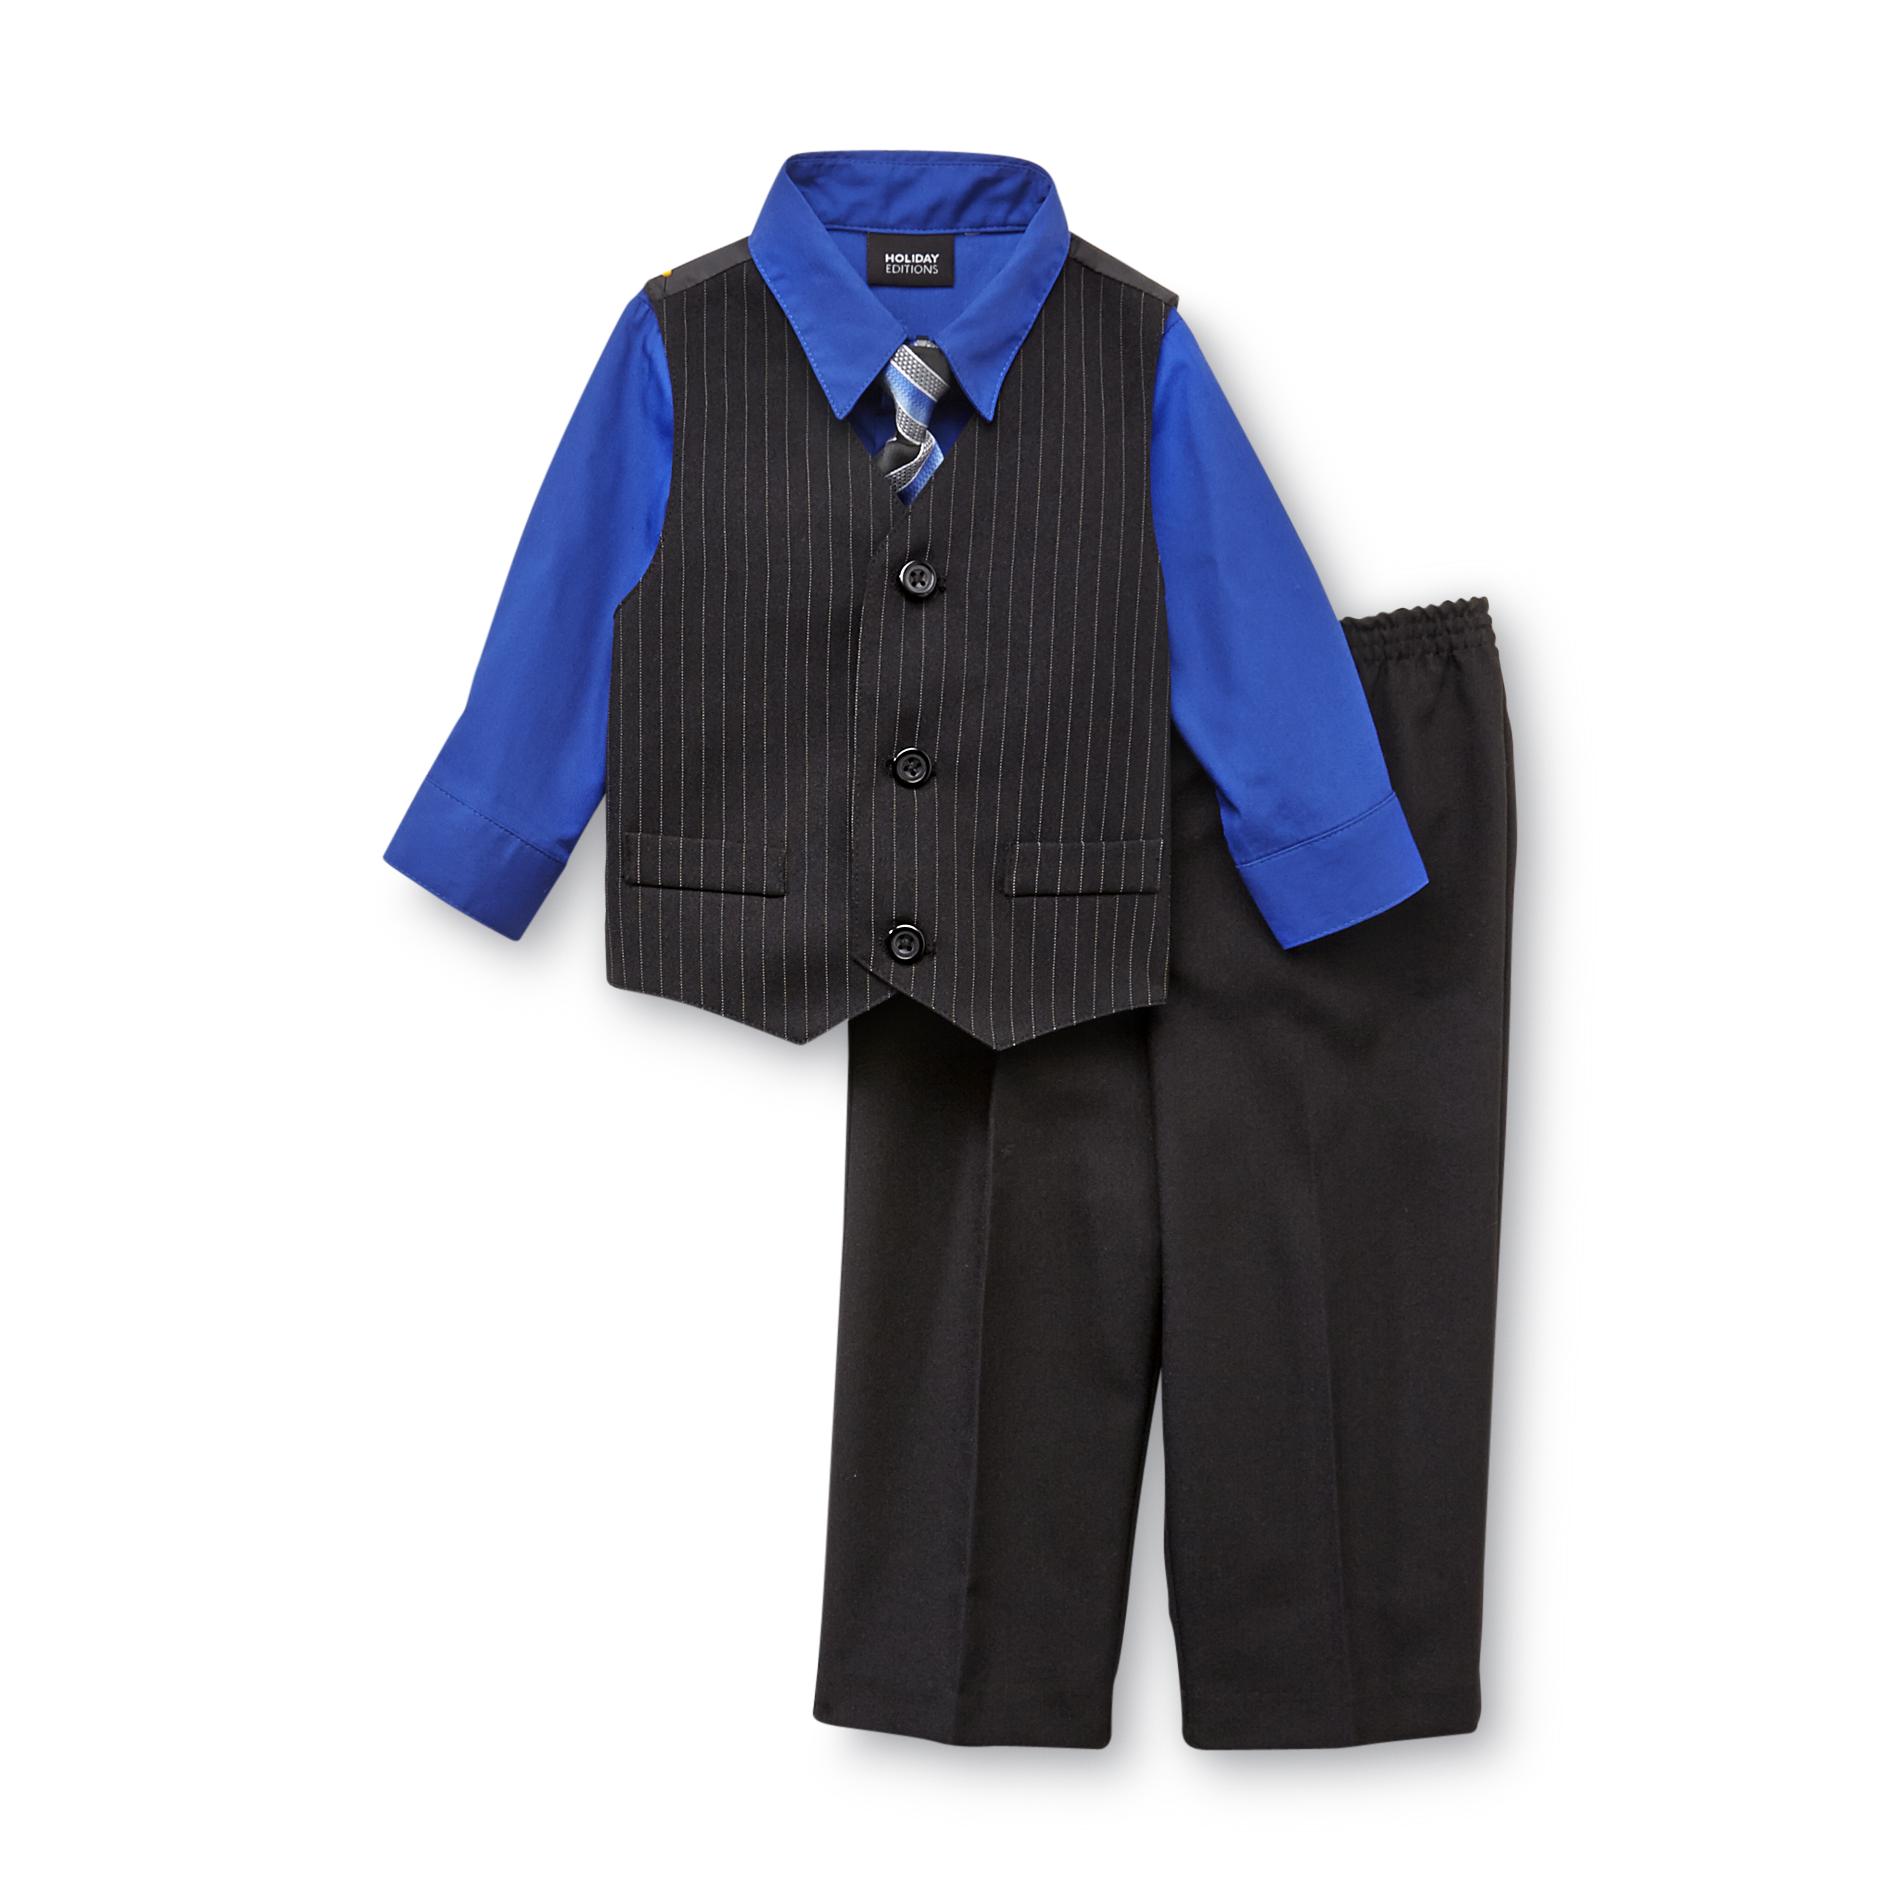 Holiday Editions Infant & Toddler Boy's 4-Piece Vest Set - Pinstriped